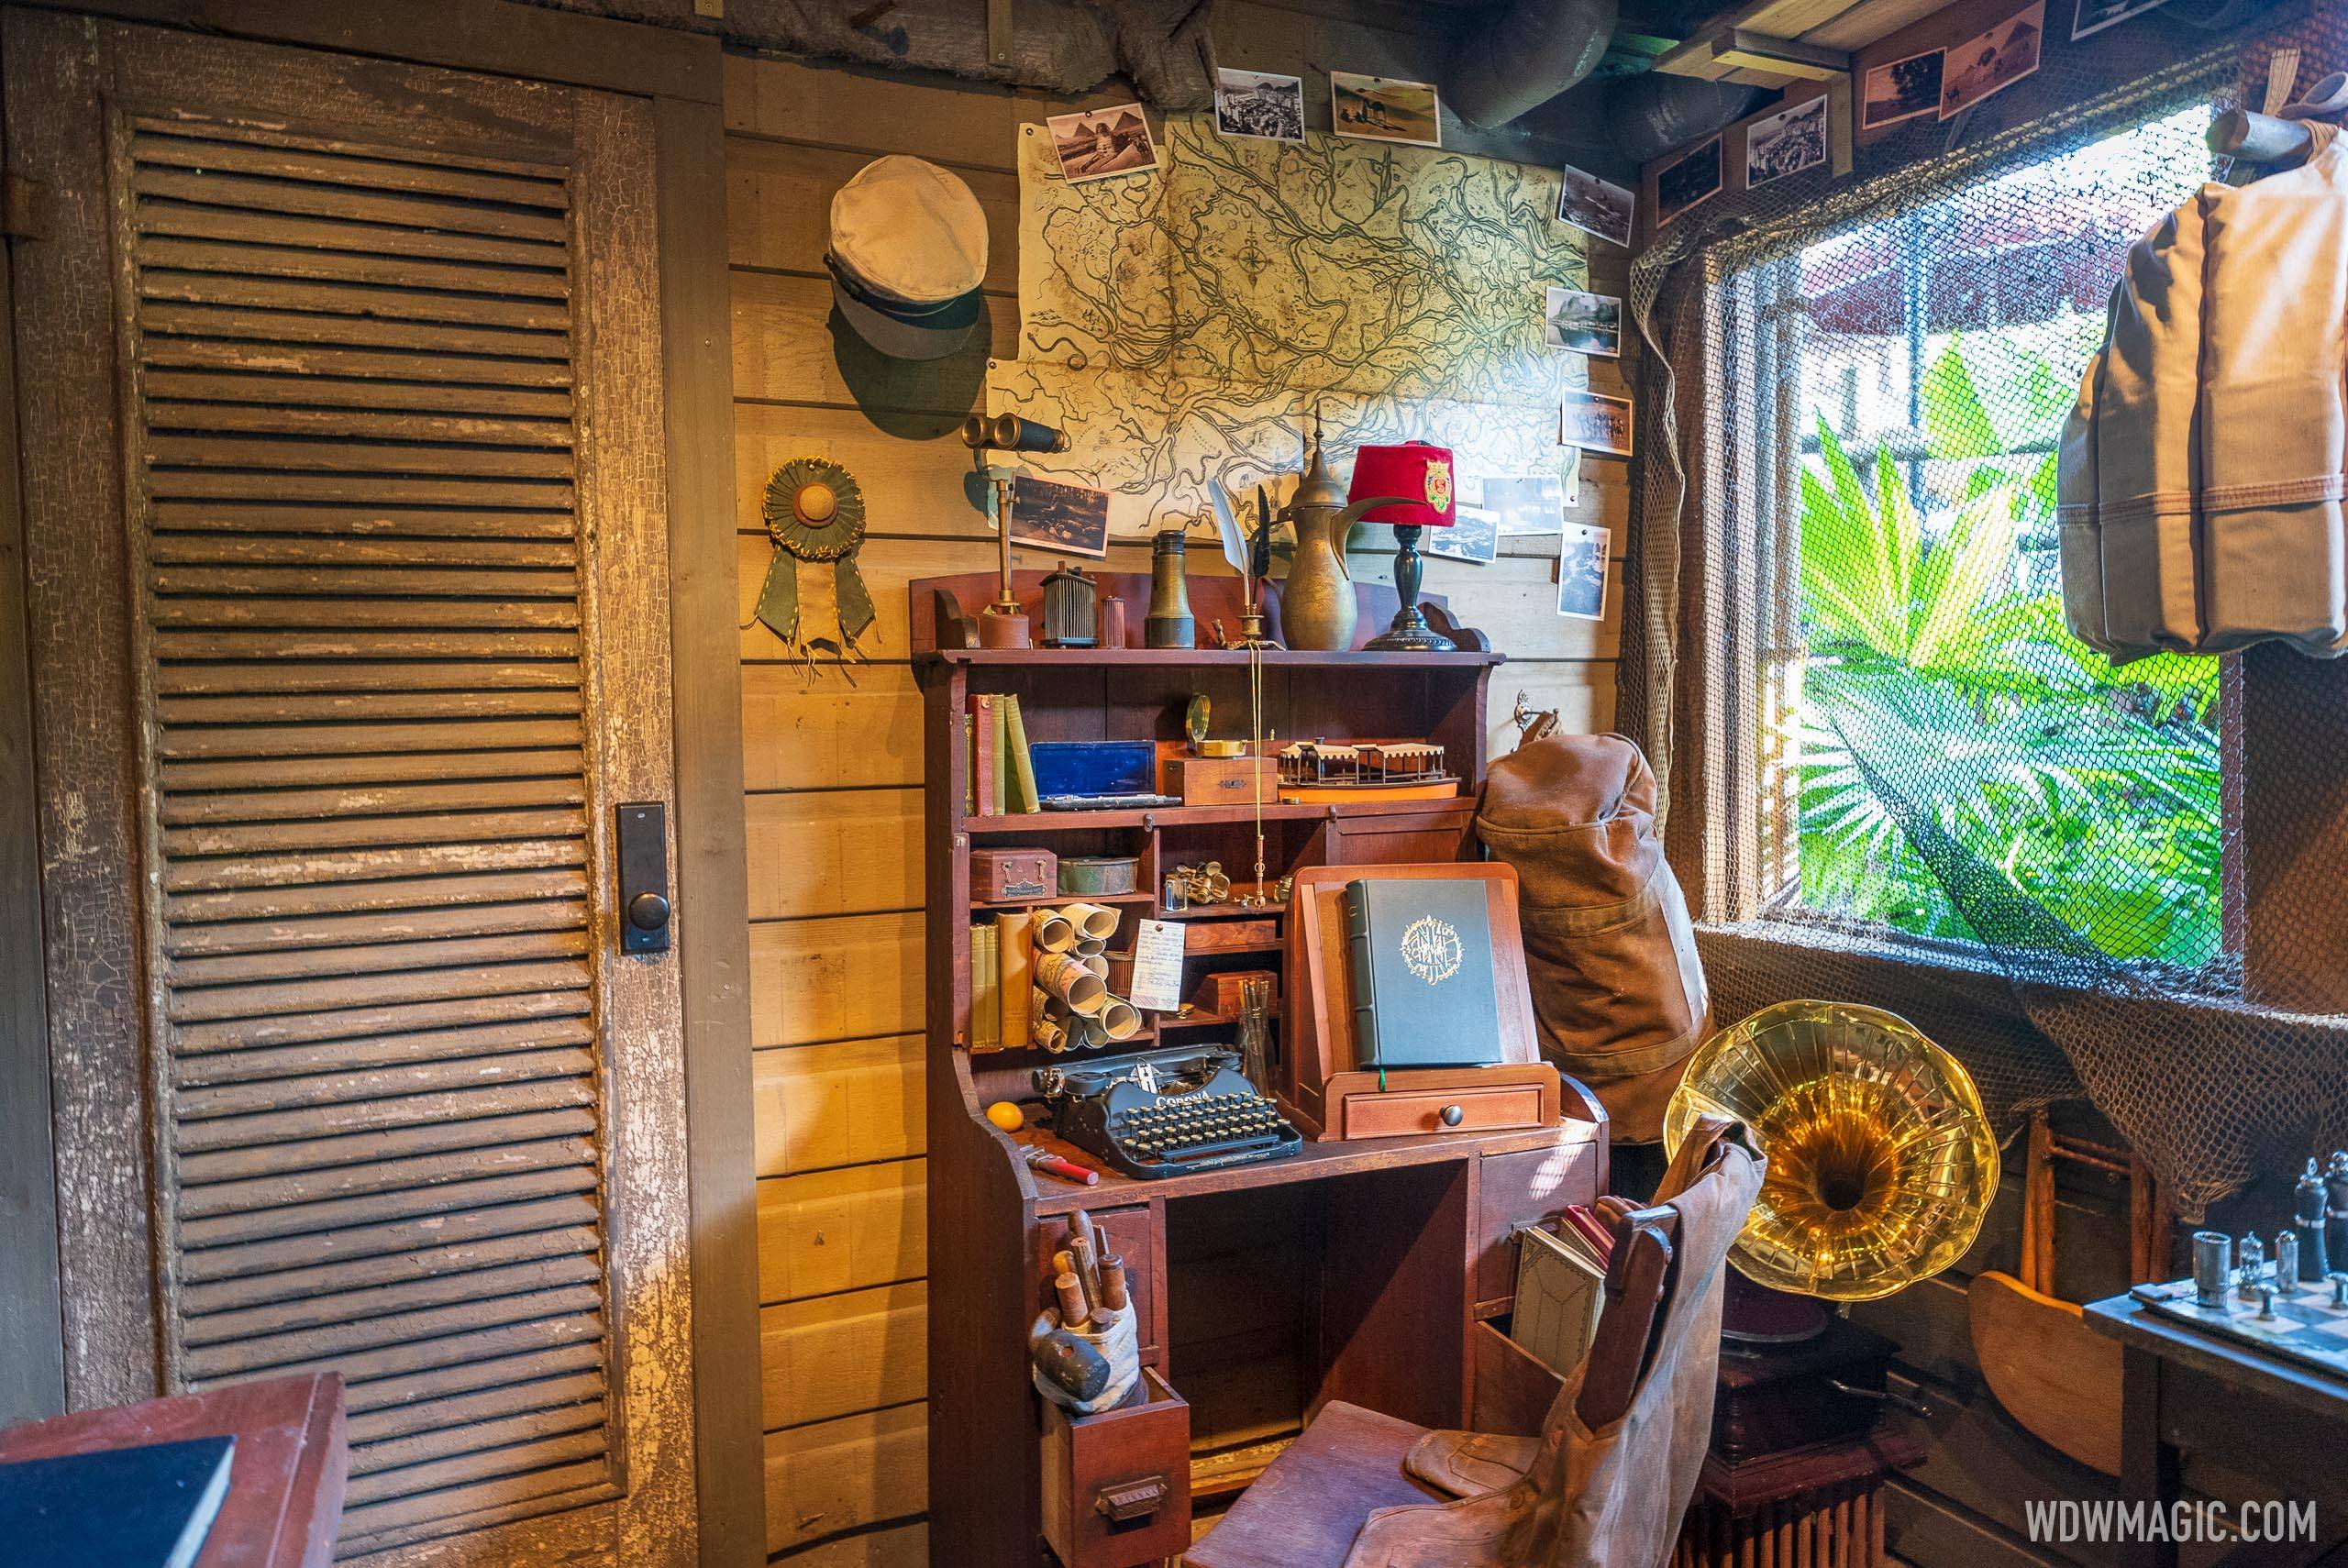 New props in the Jungle Cruise queue area office 